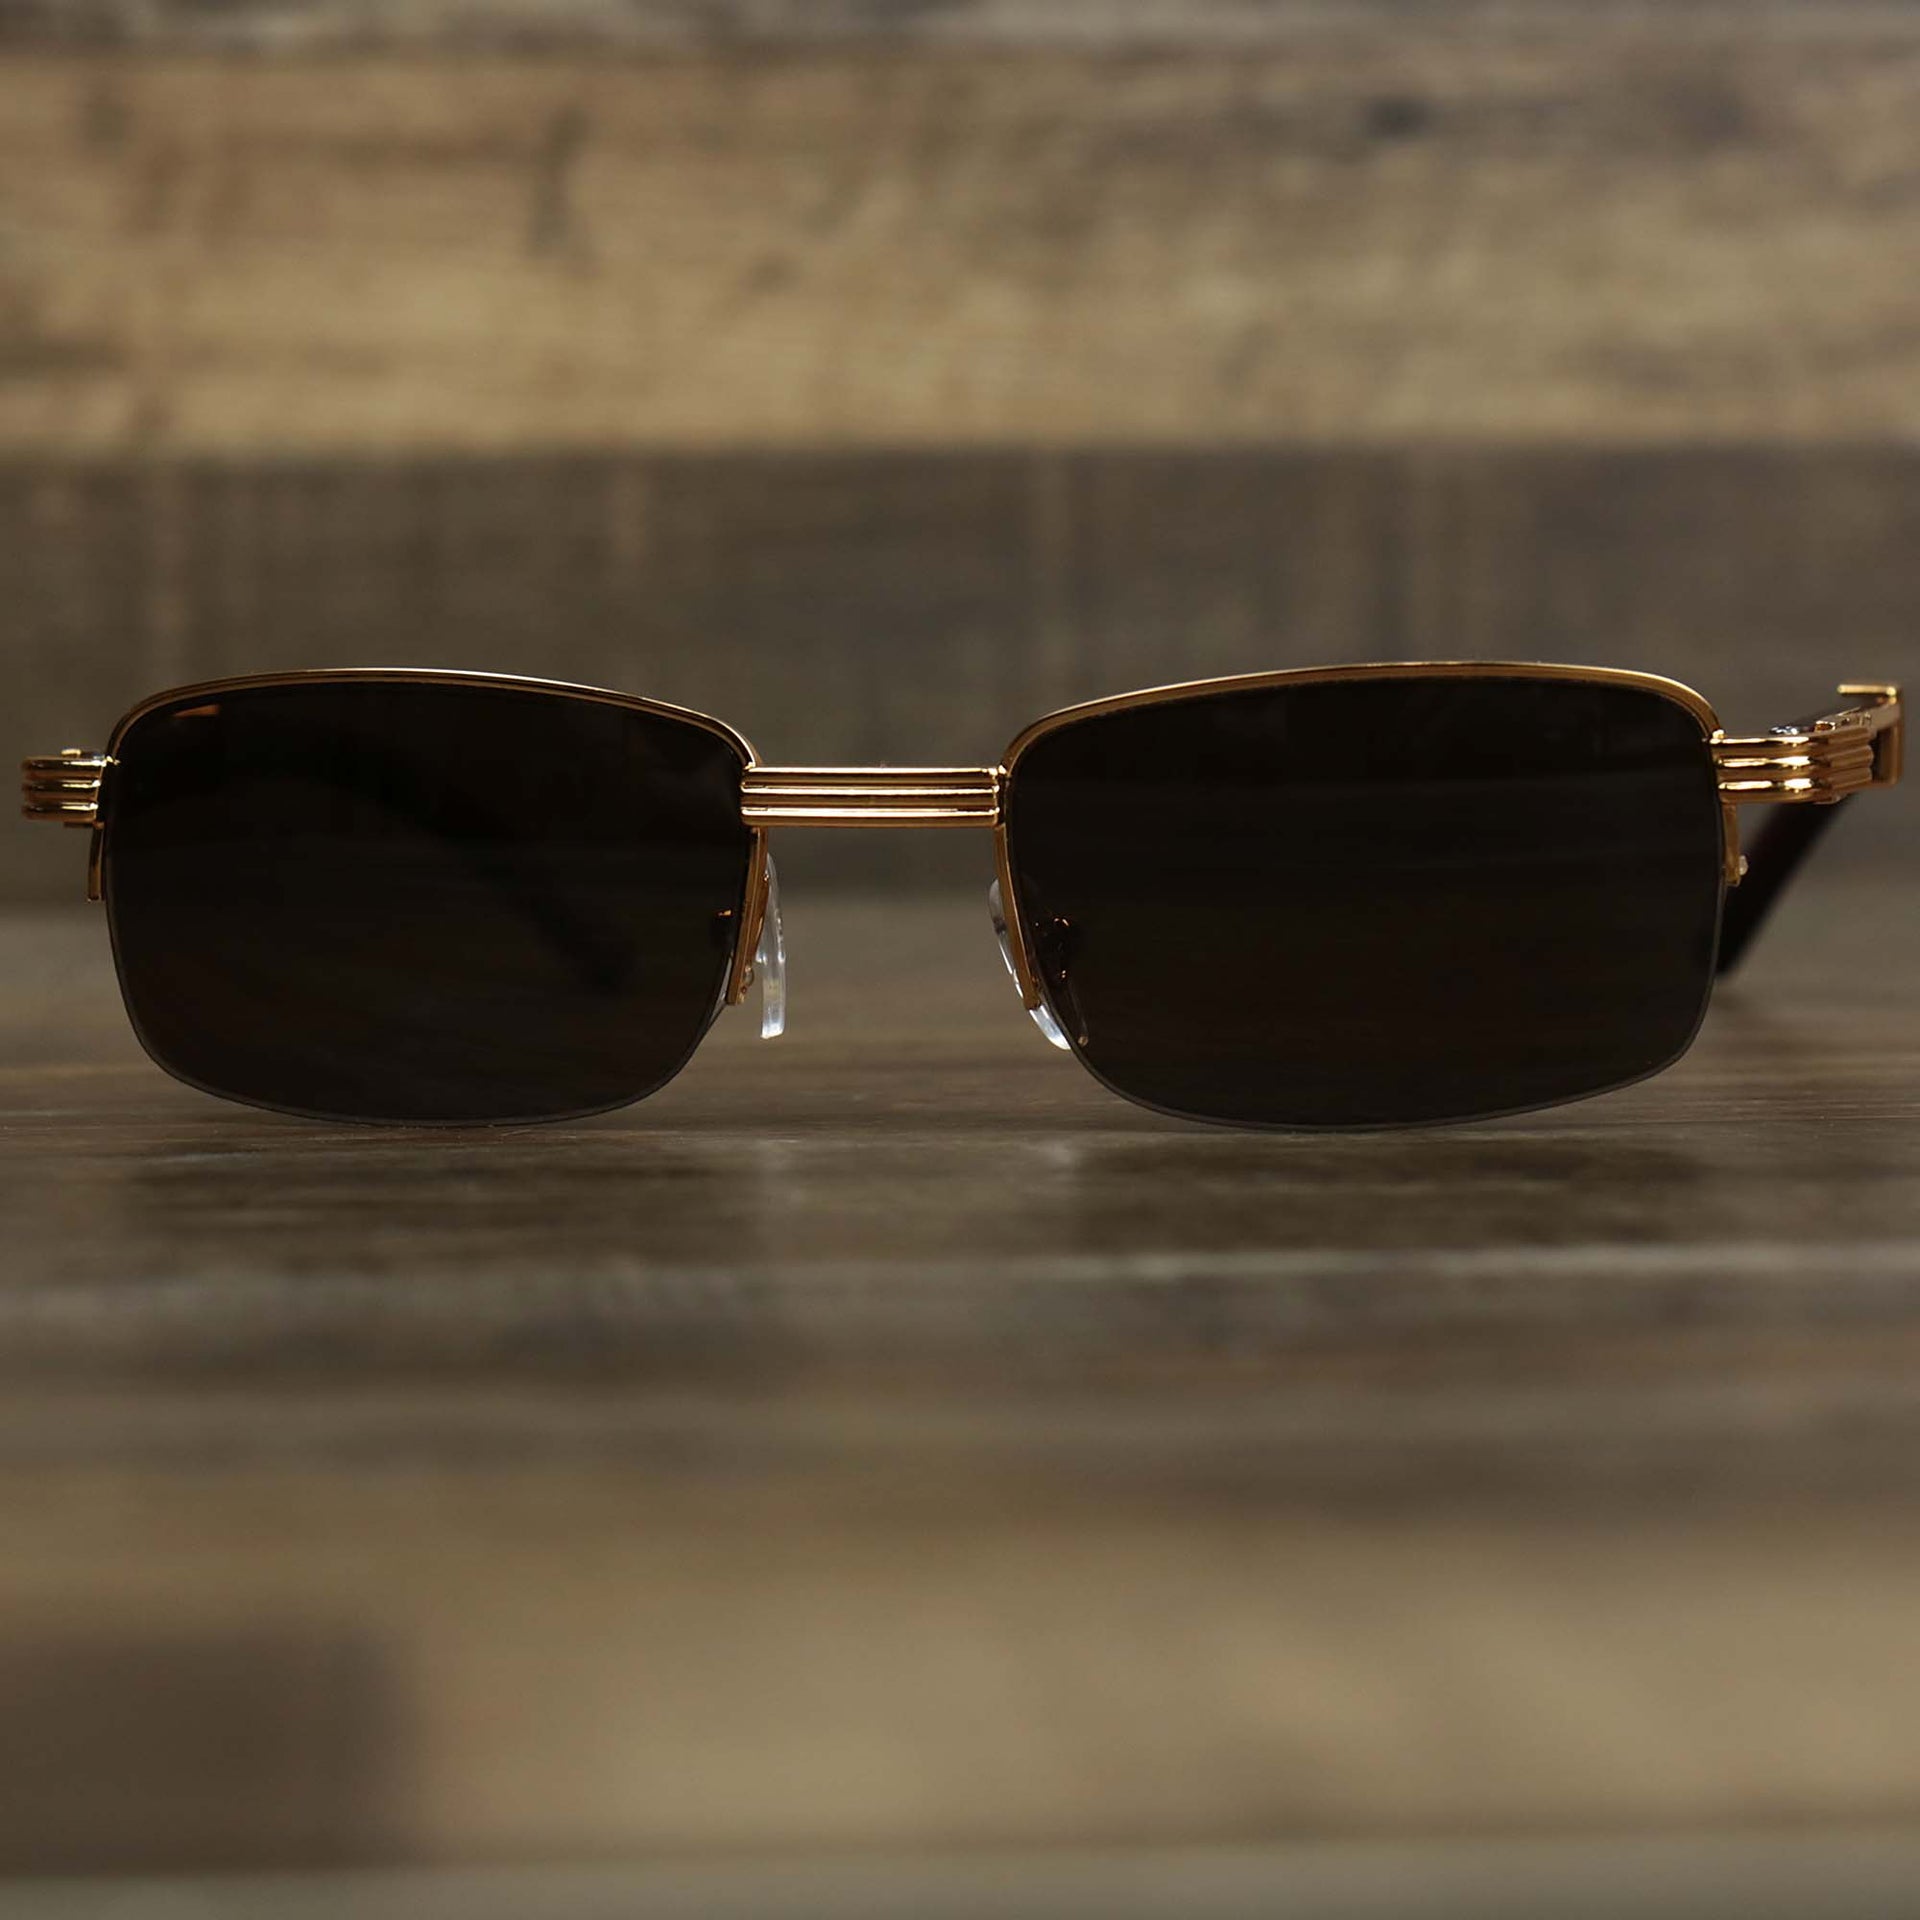 The Rectangle 3 Row Frame Dark Brown Lens Sunglasses with Gold Frame